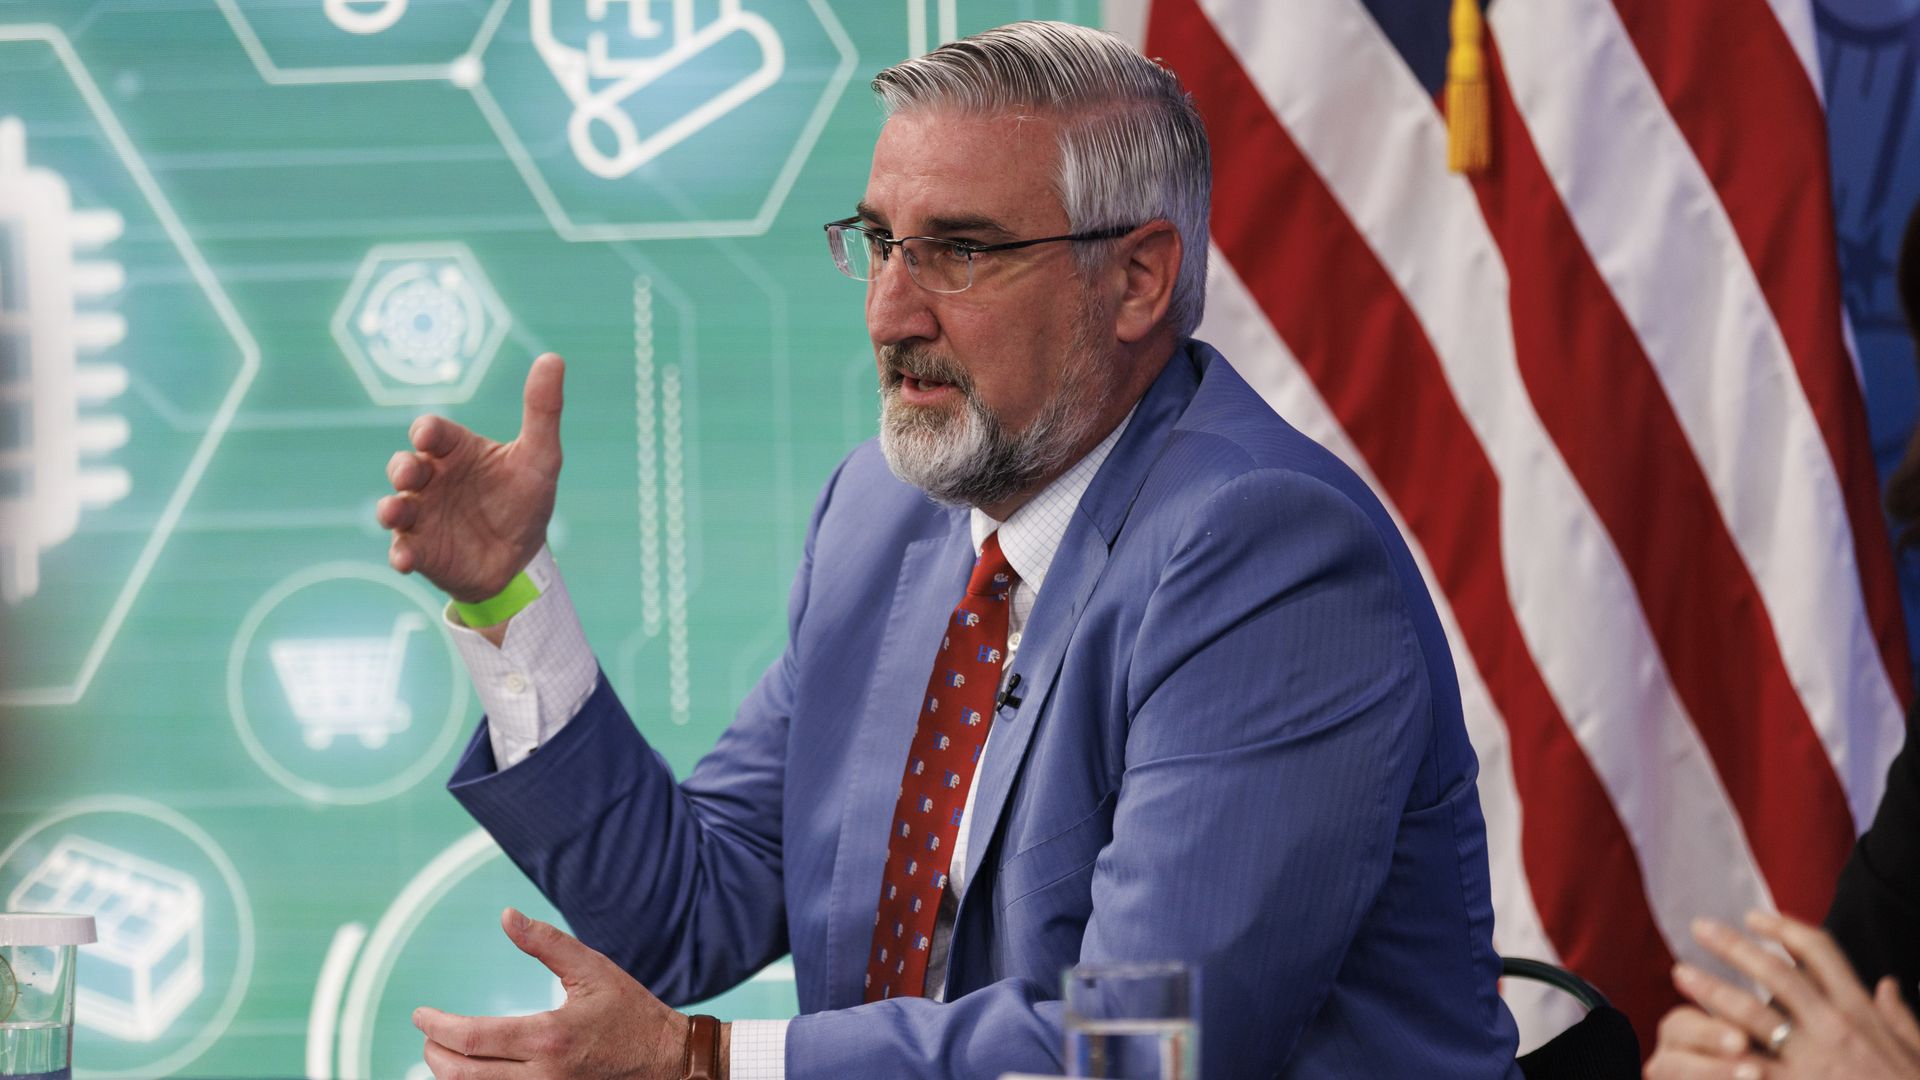 Eric Holcomb, governor of Indiana, speaks during a meeting with U.S. President Biden,  in the Eisenhower Executive Office Building in Washington, D.C., U.S., on Wednesday, March 9, 2022. 